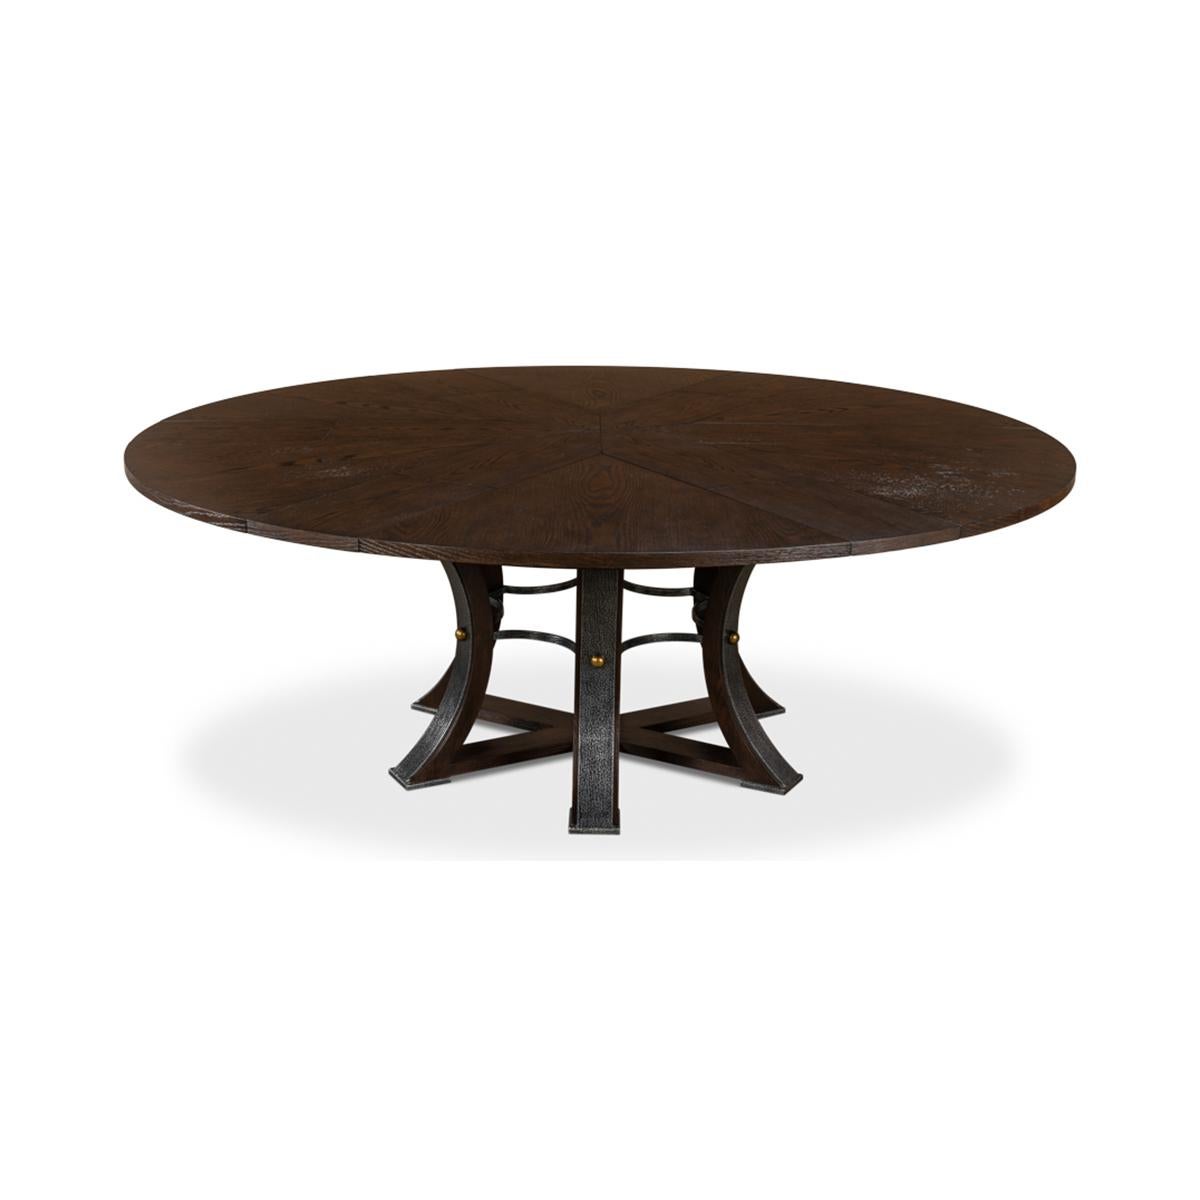 Iron Large Modern Industrial Dining Table - 84 - Burnt Brown For Sale